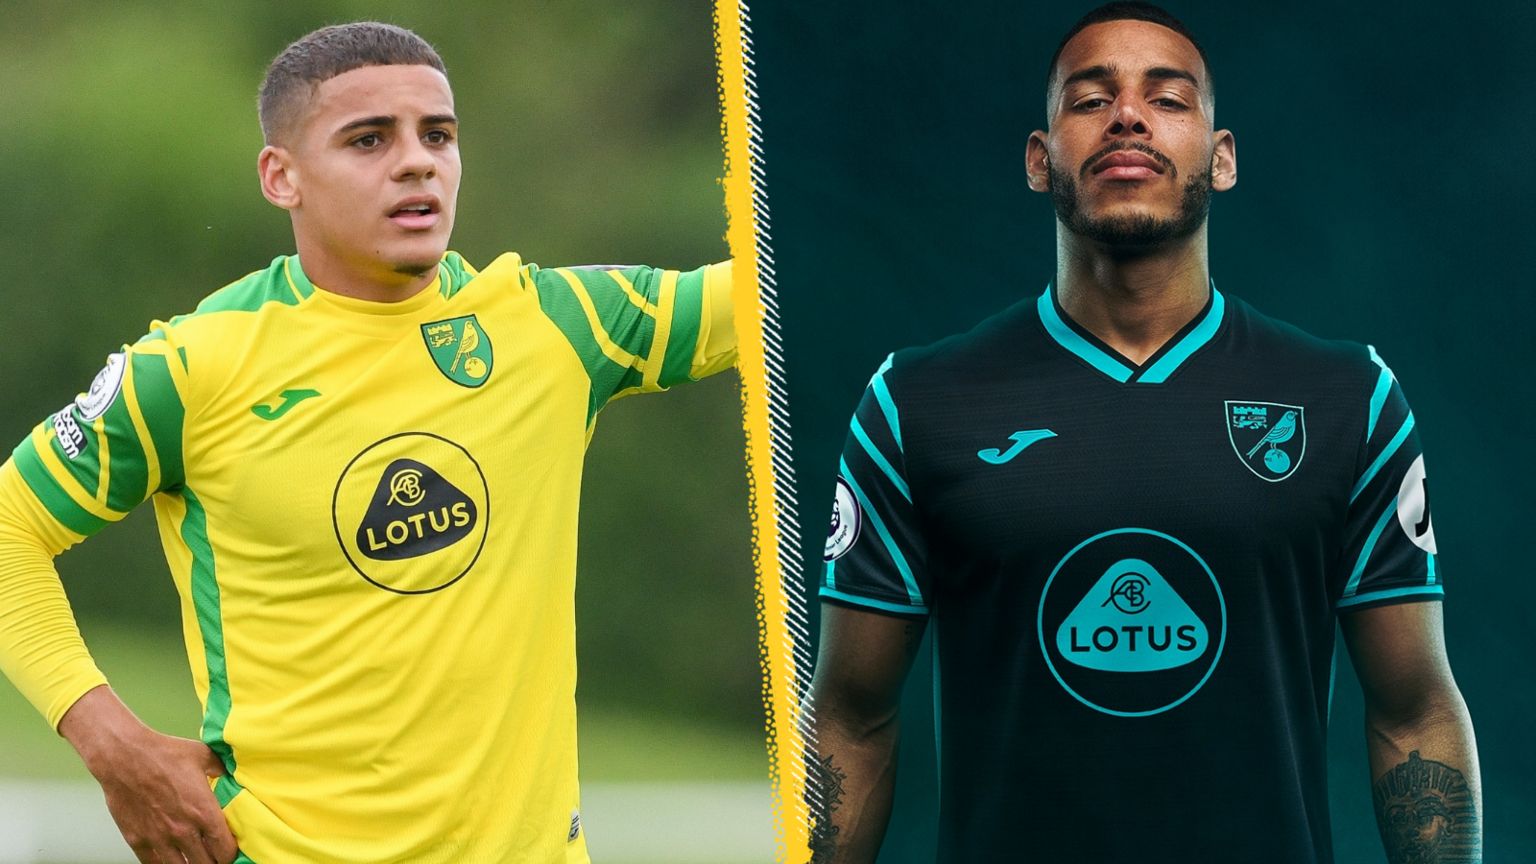 Norwich City home and away kits